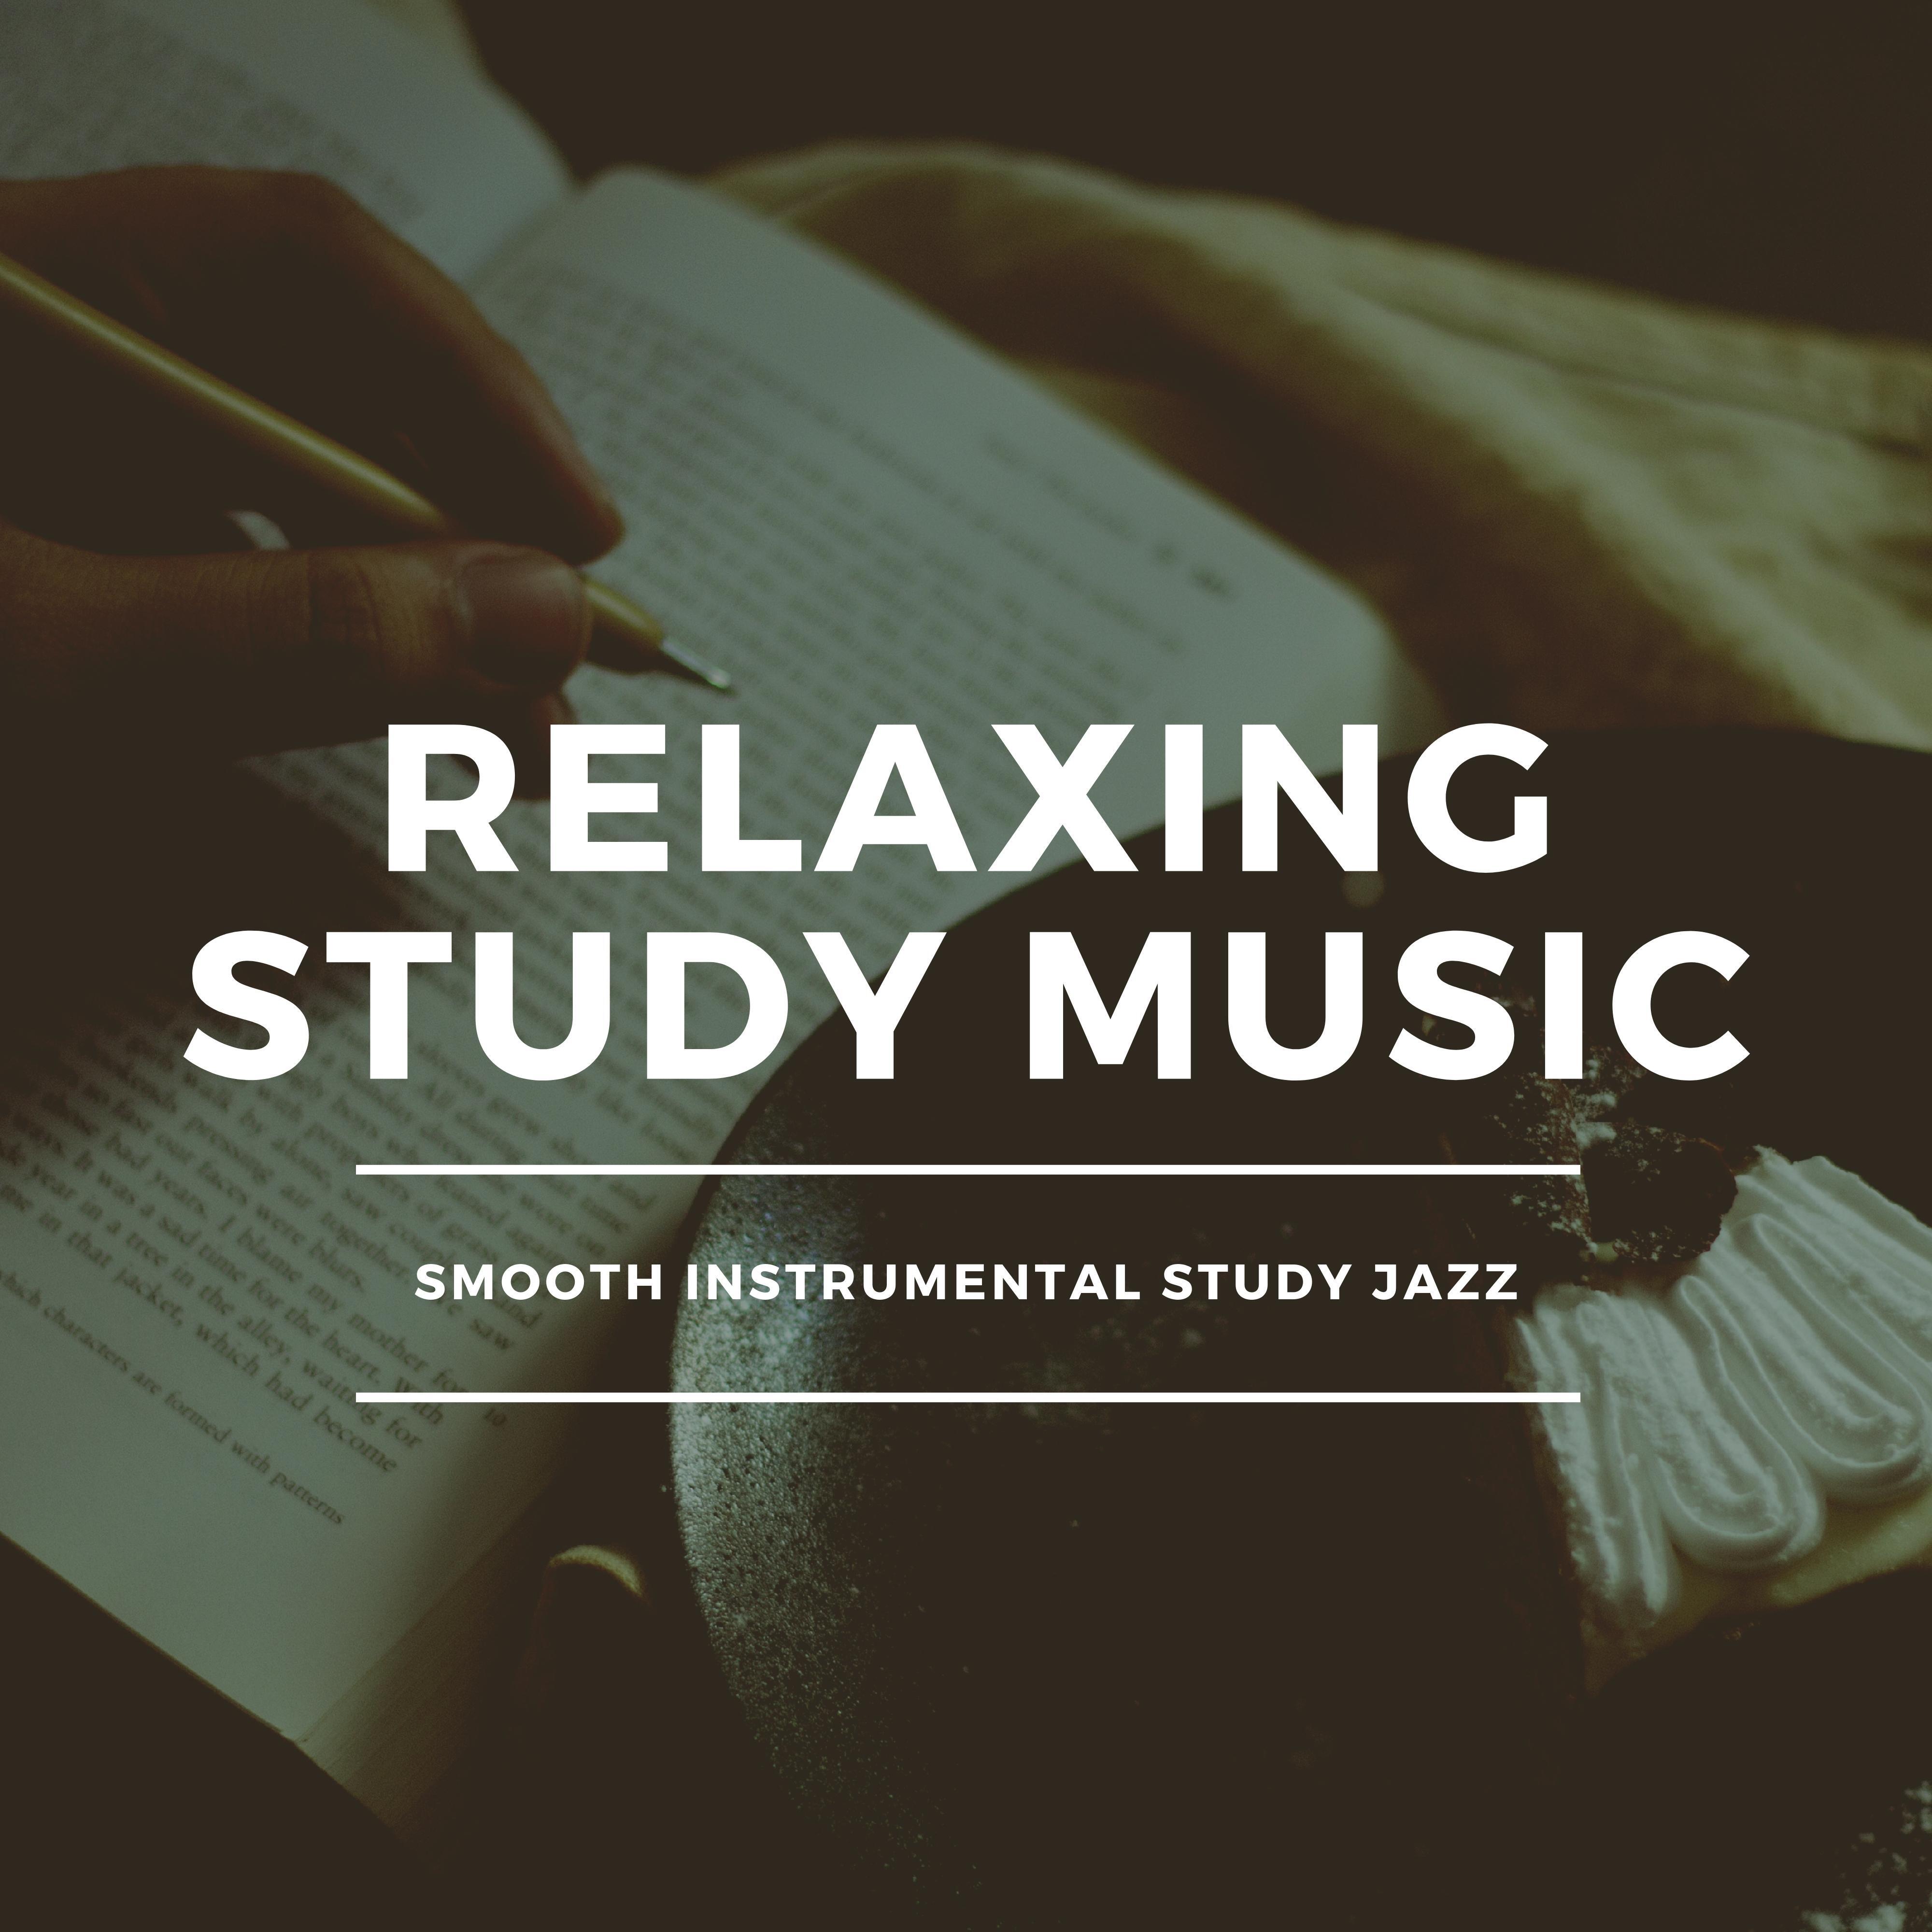 Listen Free to Relaxing Study Music - Smooth Instrumental Study Jazz